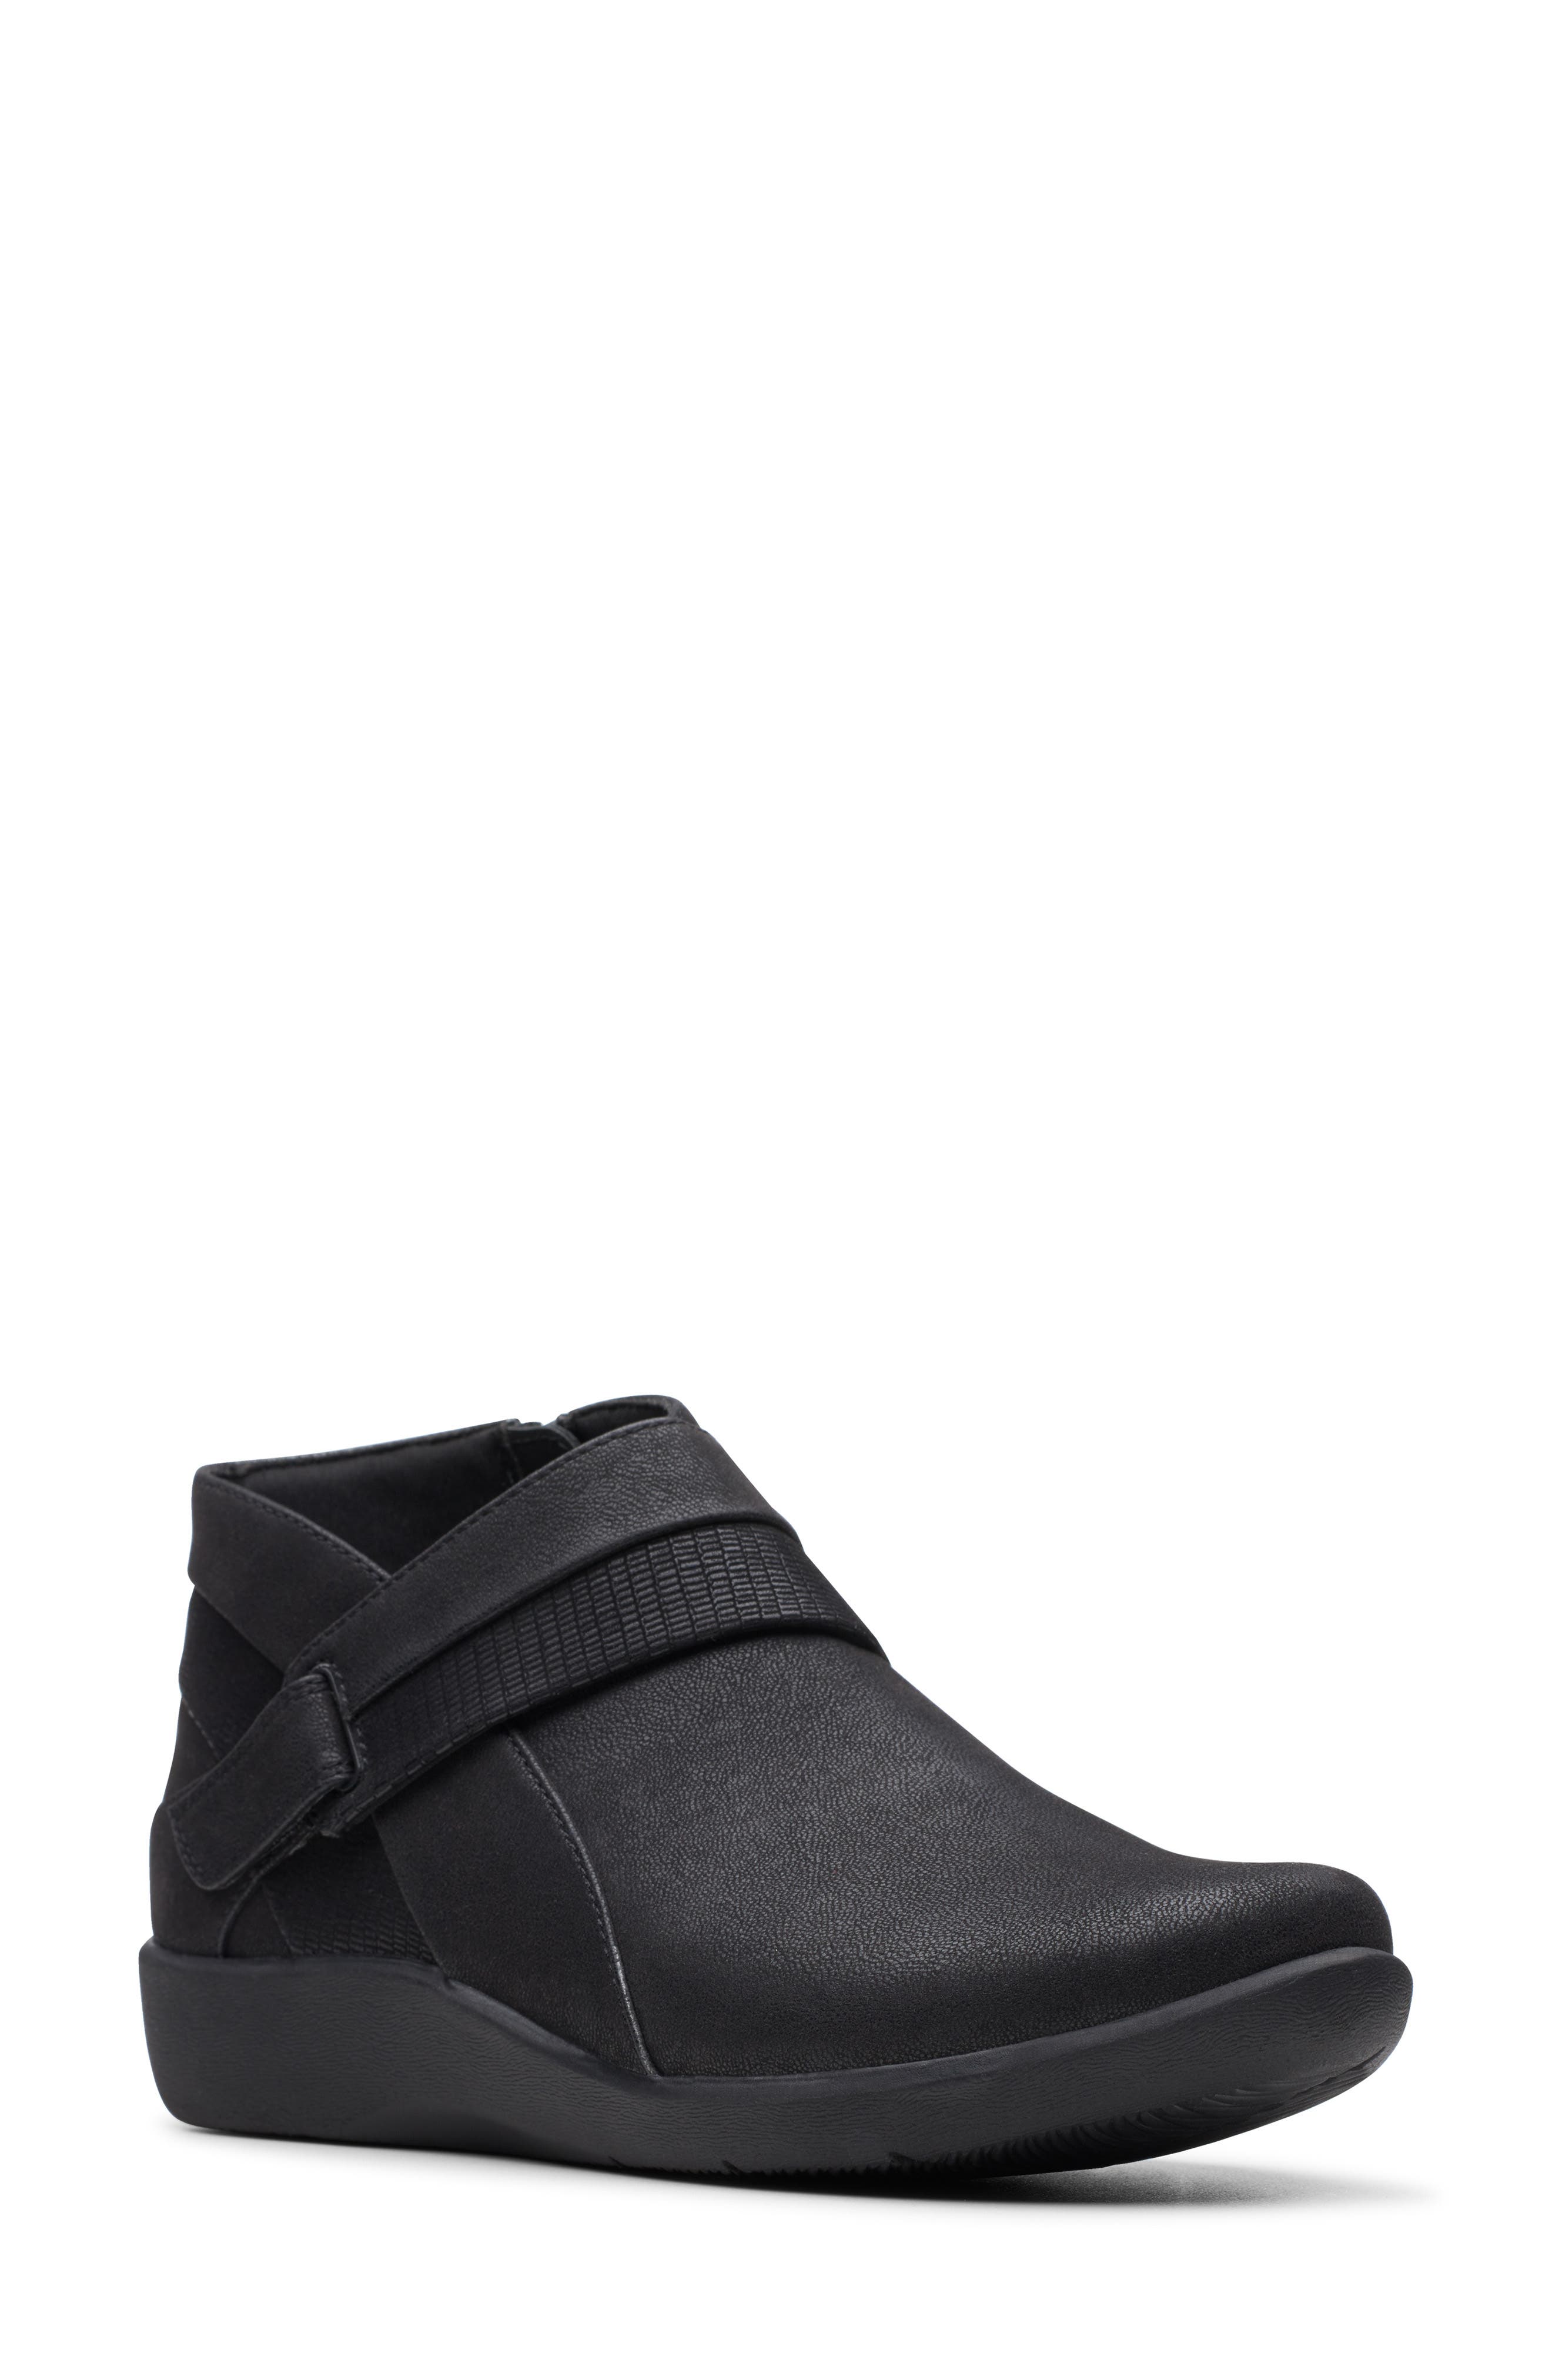 Women's Boots Clarks® Shoes | Nordstrom